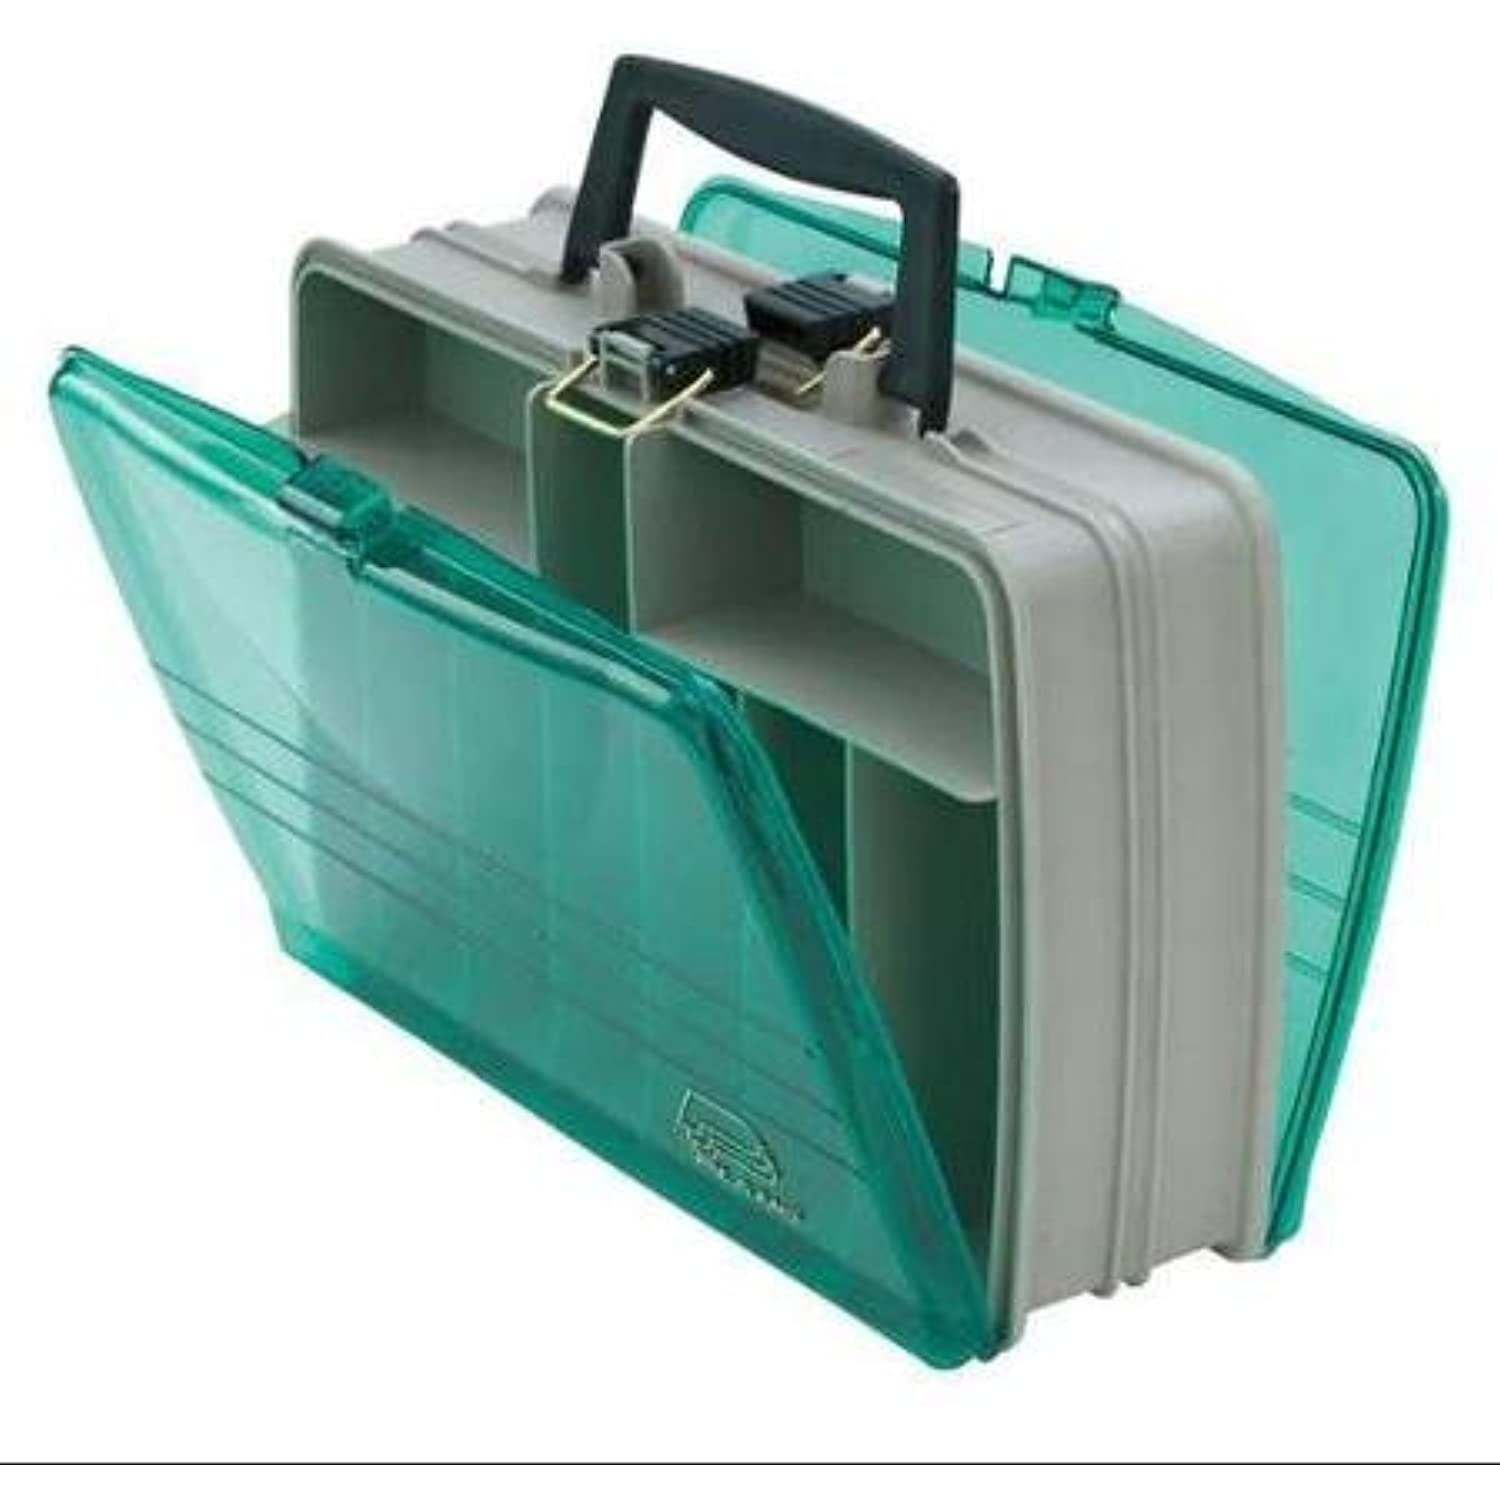 Double-sided tackle box